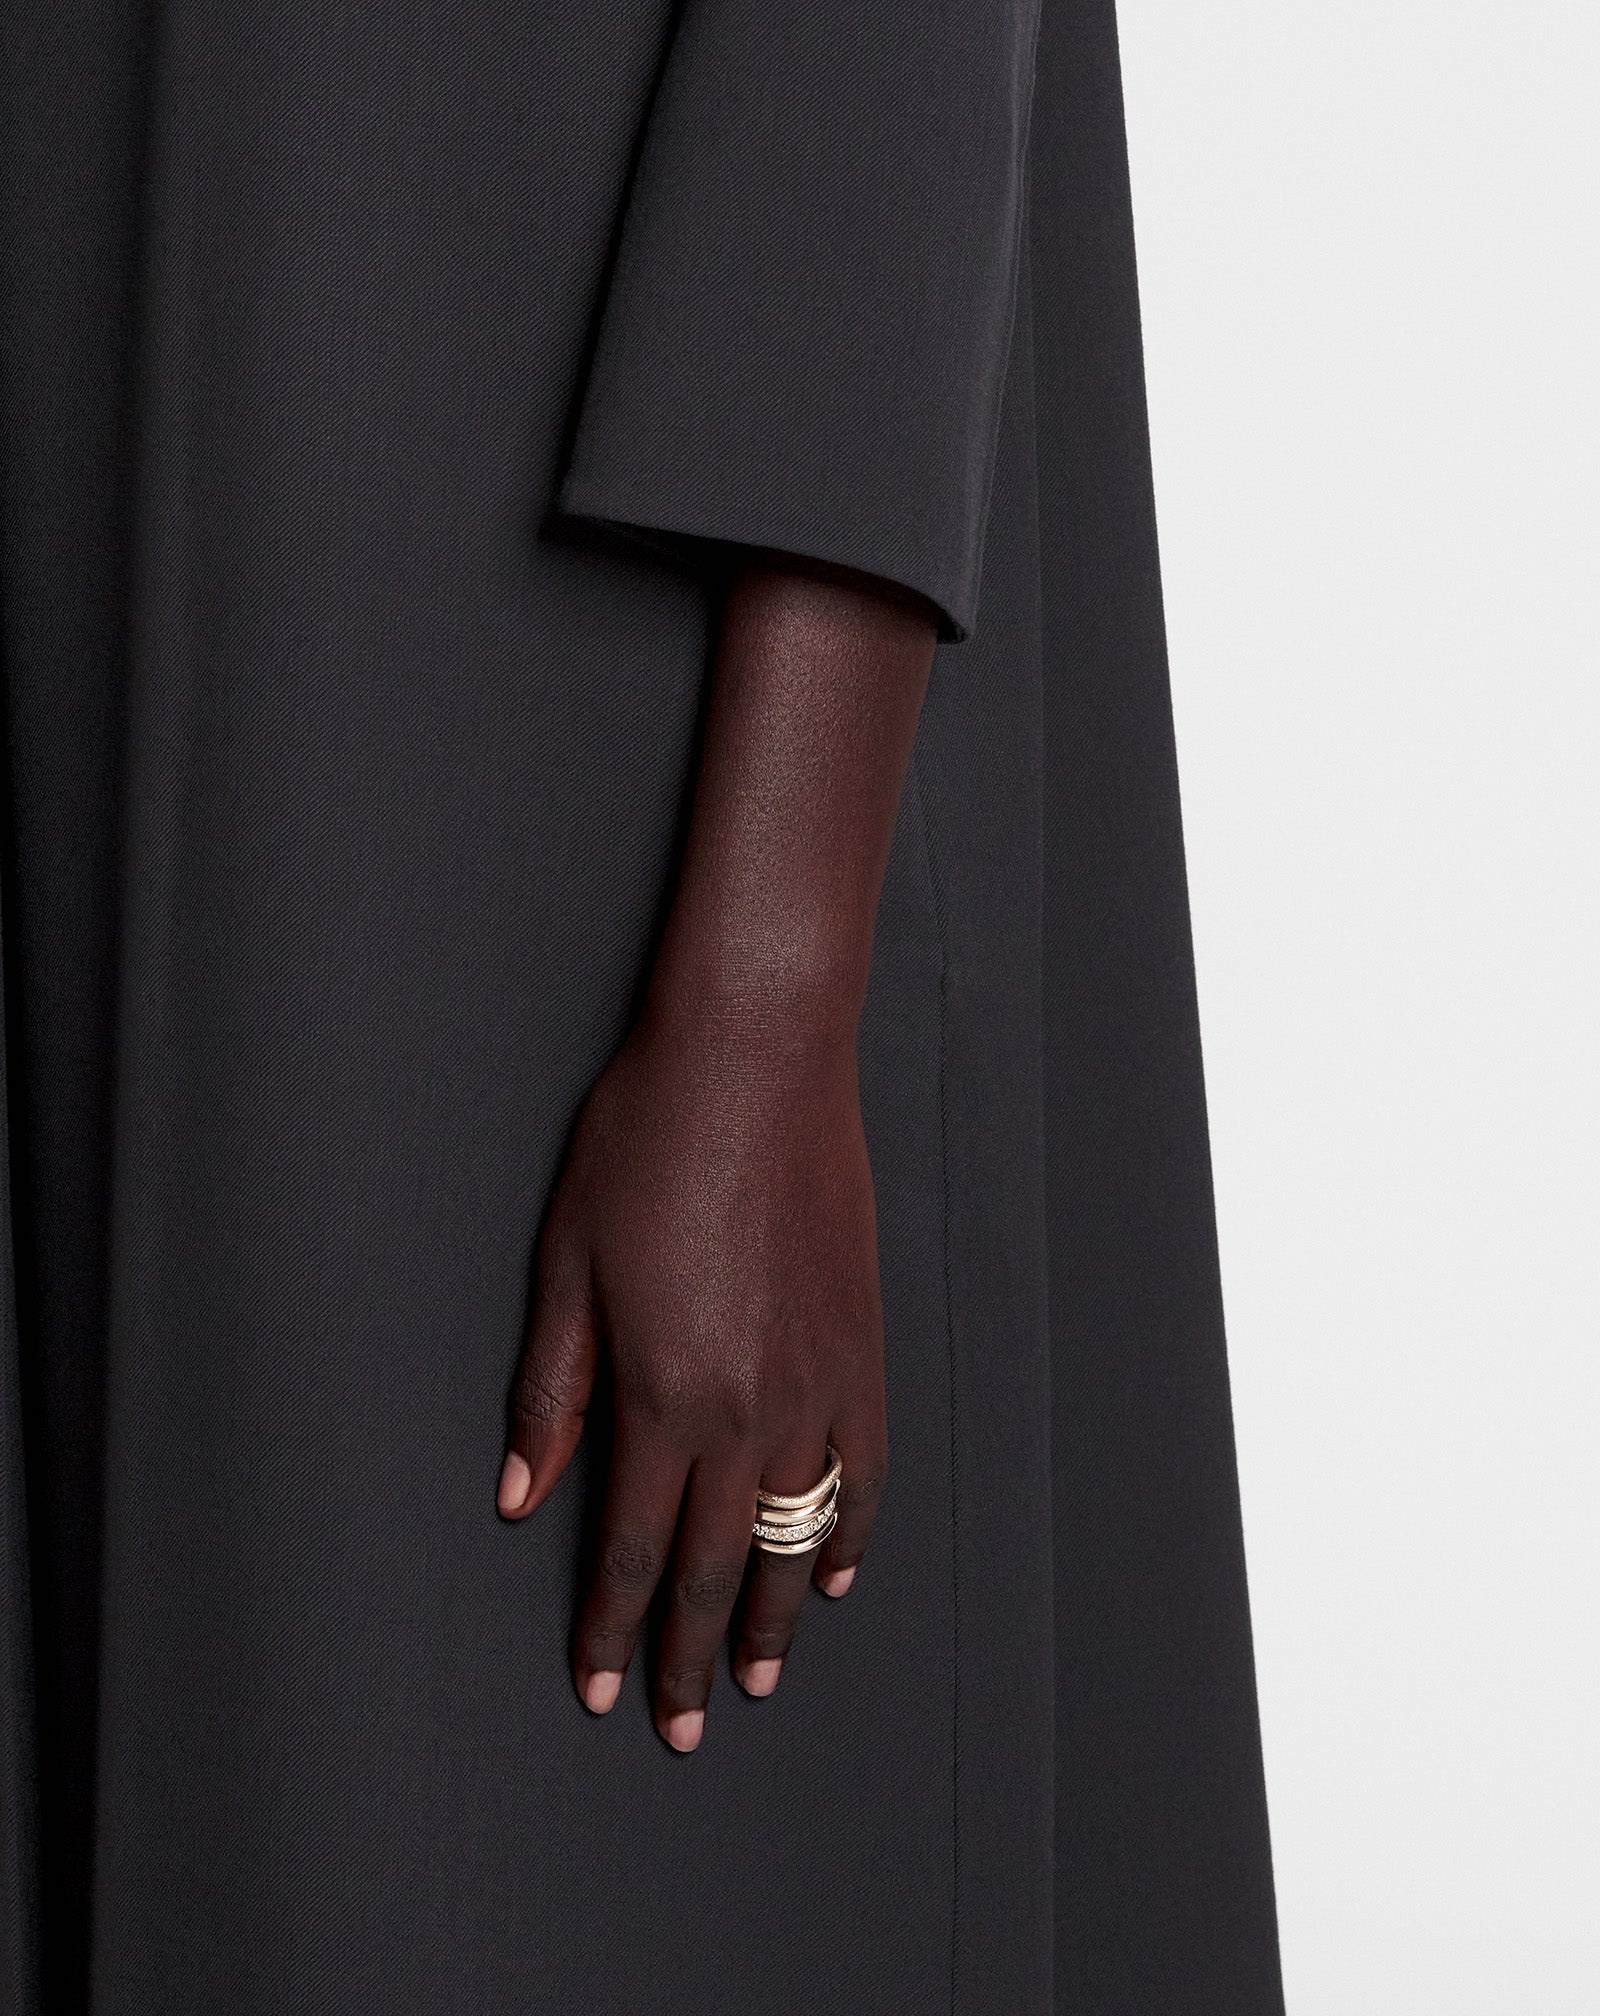 PARTITION BY LANVIN RING - 2